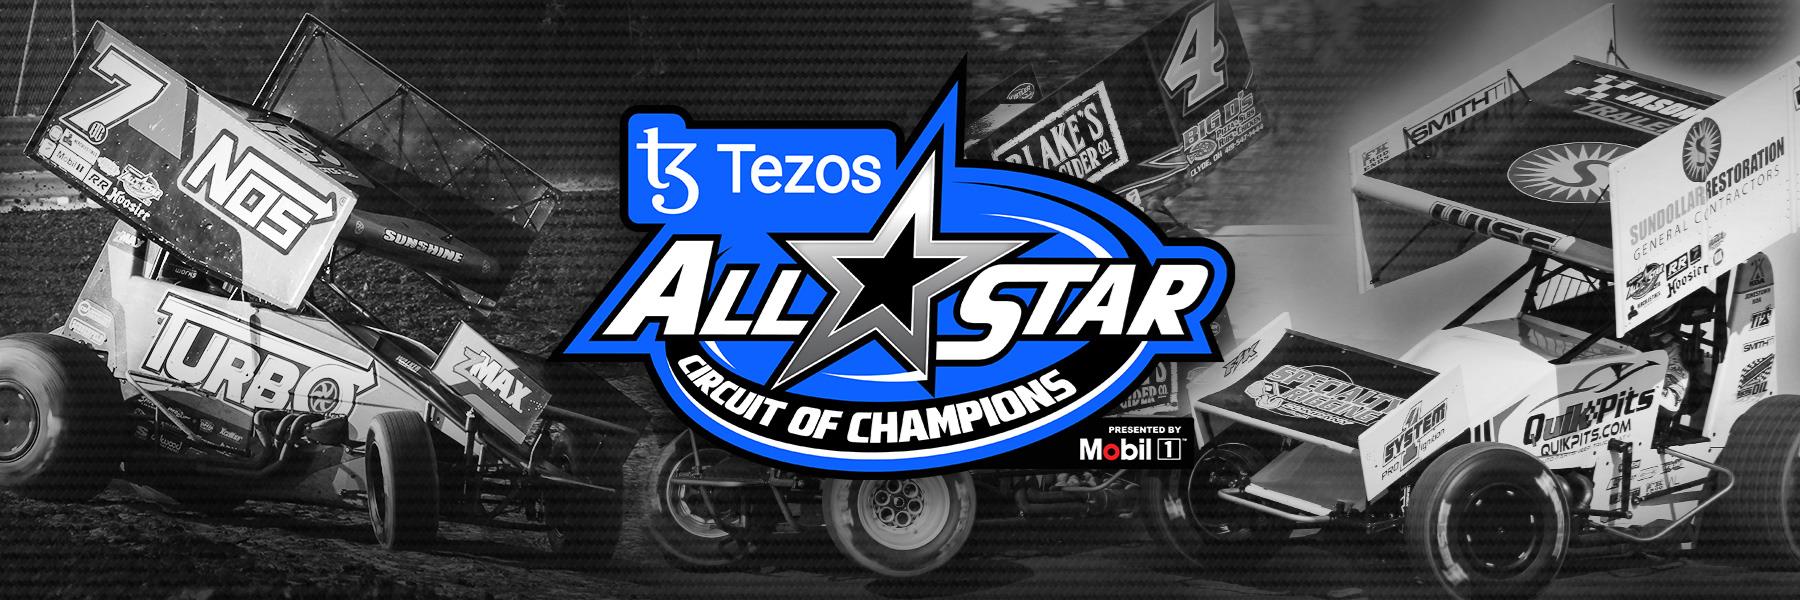 FloRacing All Star Circuit of Champions presented by Mobil 1 reveals